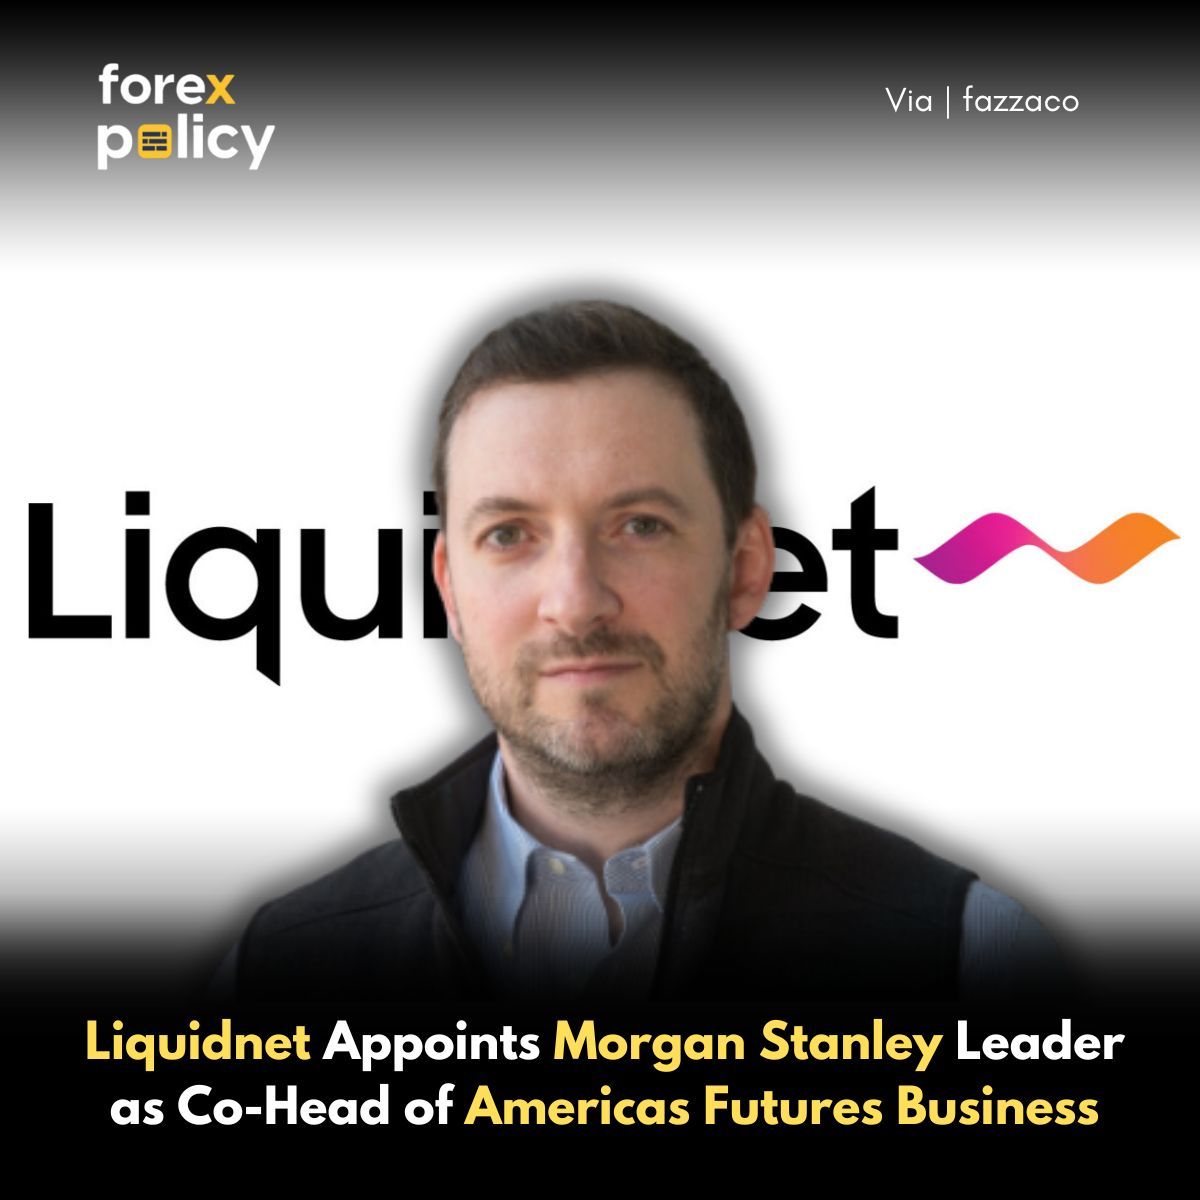 🎉 Big news in financial innovation! Alex Grinfeld joins Liquidnet as Co-Head of Listed Derivatives Americas, bringing extensive experience from Morgan Stanley & Goldman Sachs. Cheers to Alex's new chapter! 🚀📈 #AlexGrinfeld #FinanceInnovation #DerivativesTrading